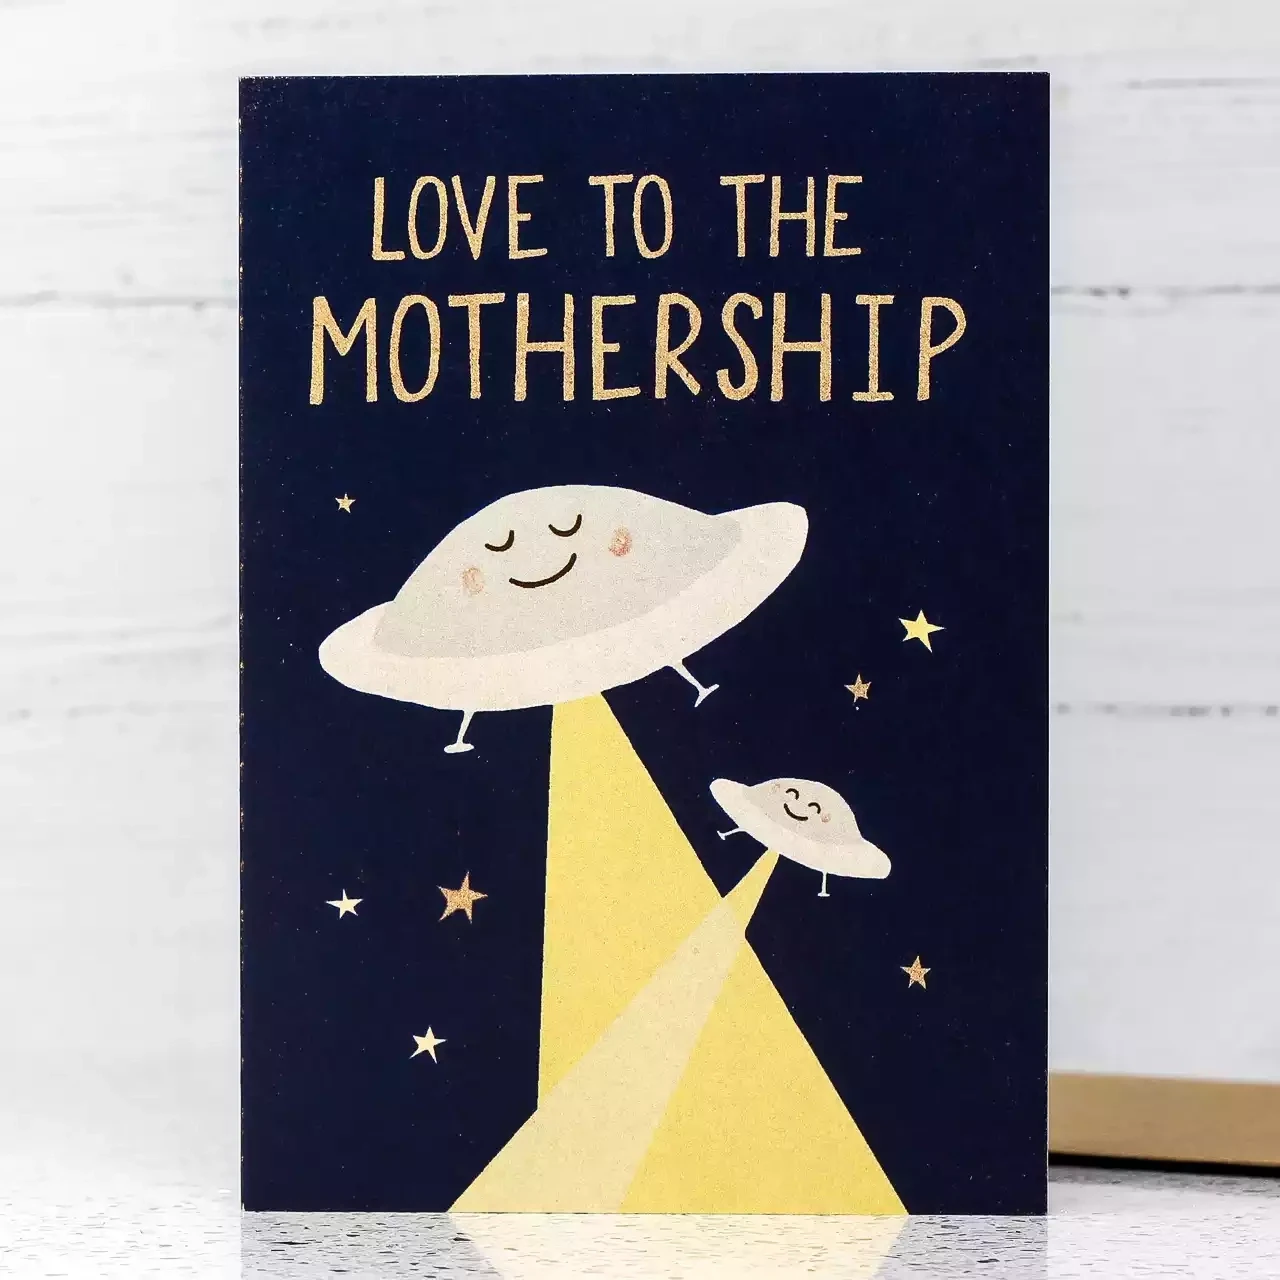 Mothership Card by Stormy Knight